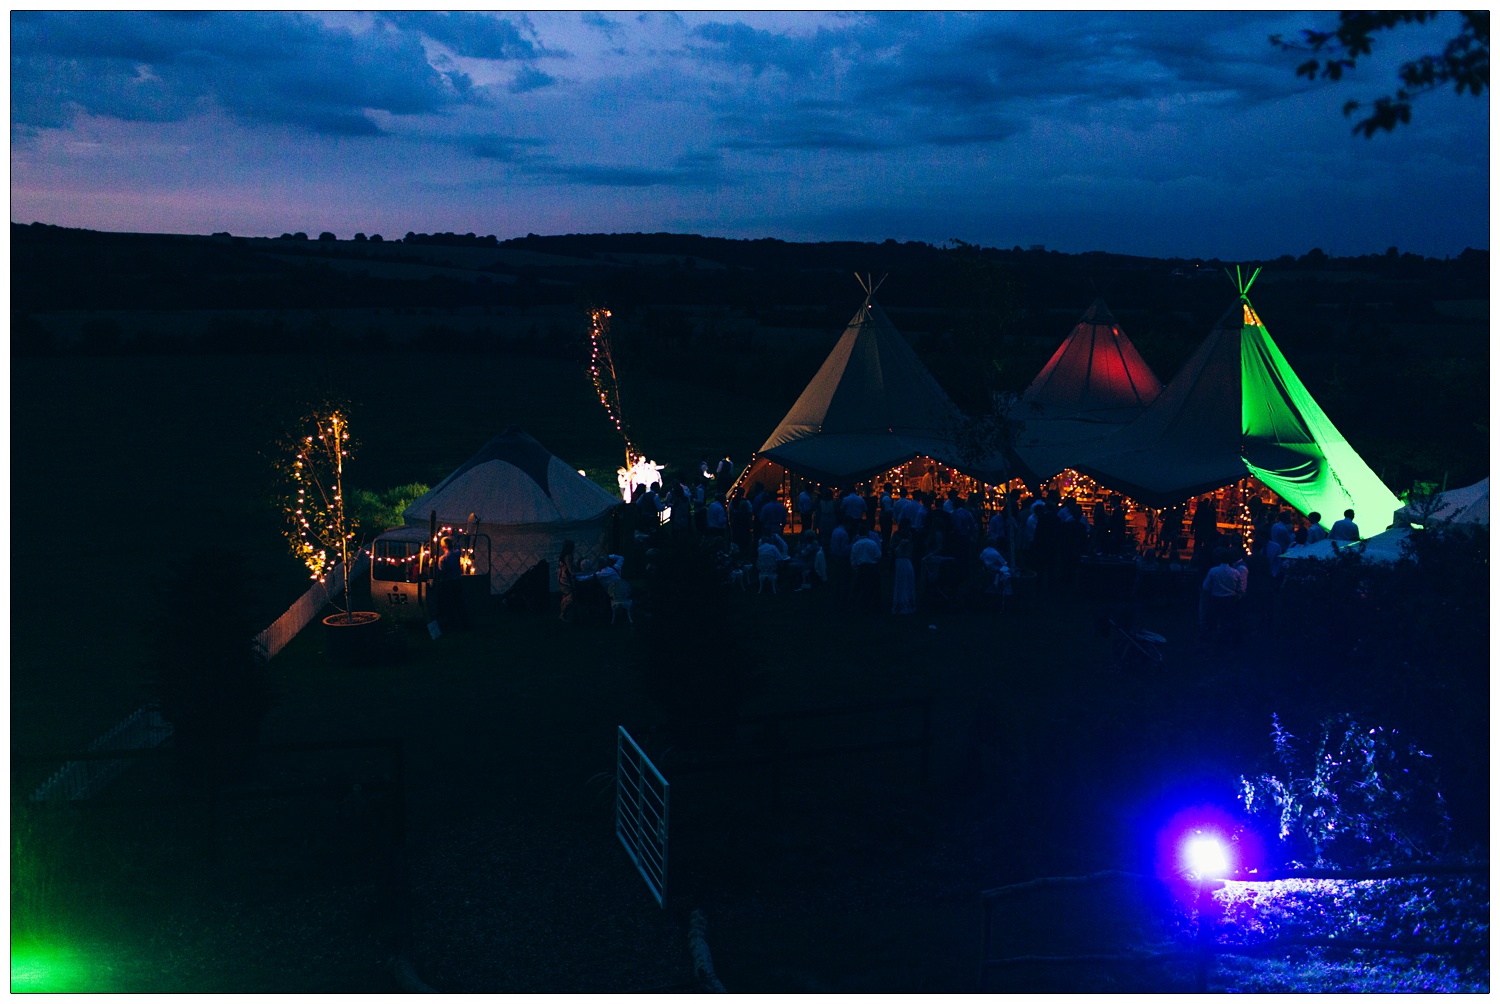 A twilight view from above over a wedding at home on a farm. there is a ski cable car, a yurt and a Tentipi. There are red, green and blue lights. There are strings of lights. Fields in the background.